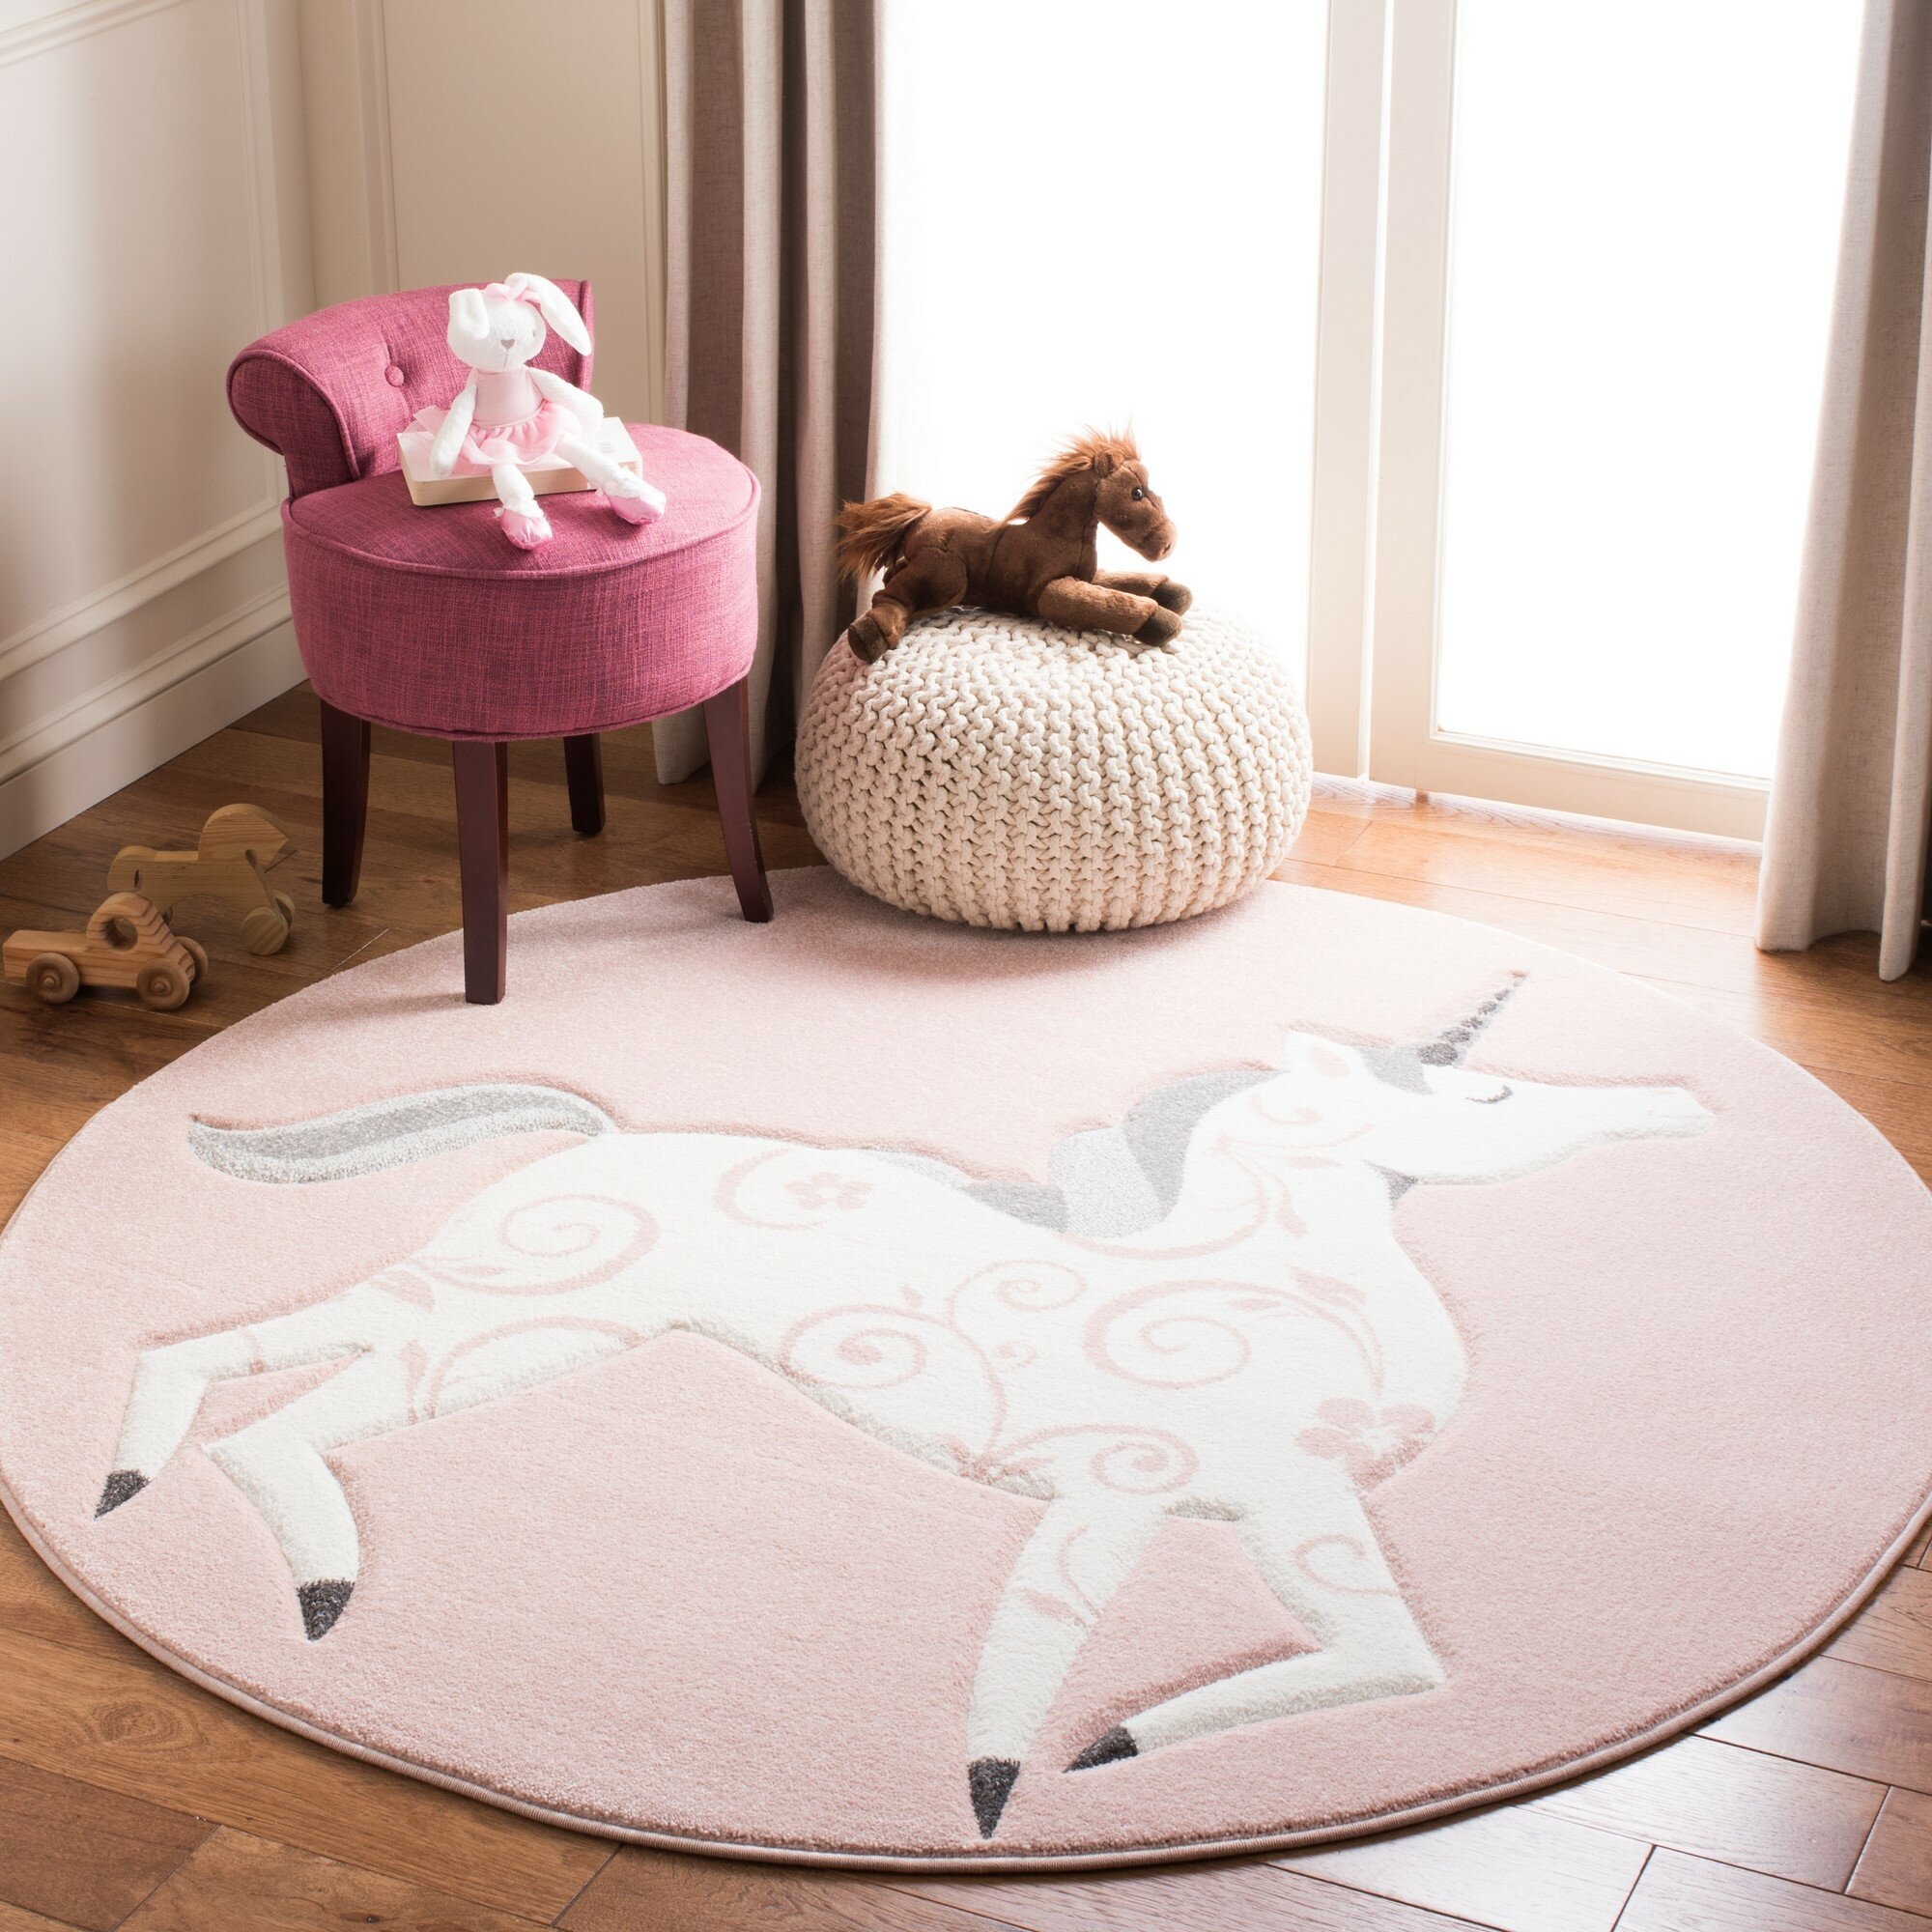 Pink Rug For Nursery Visualhunt, Pink Area Rugs For Baby Nursery